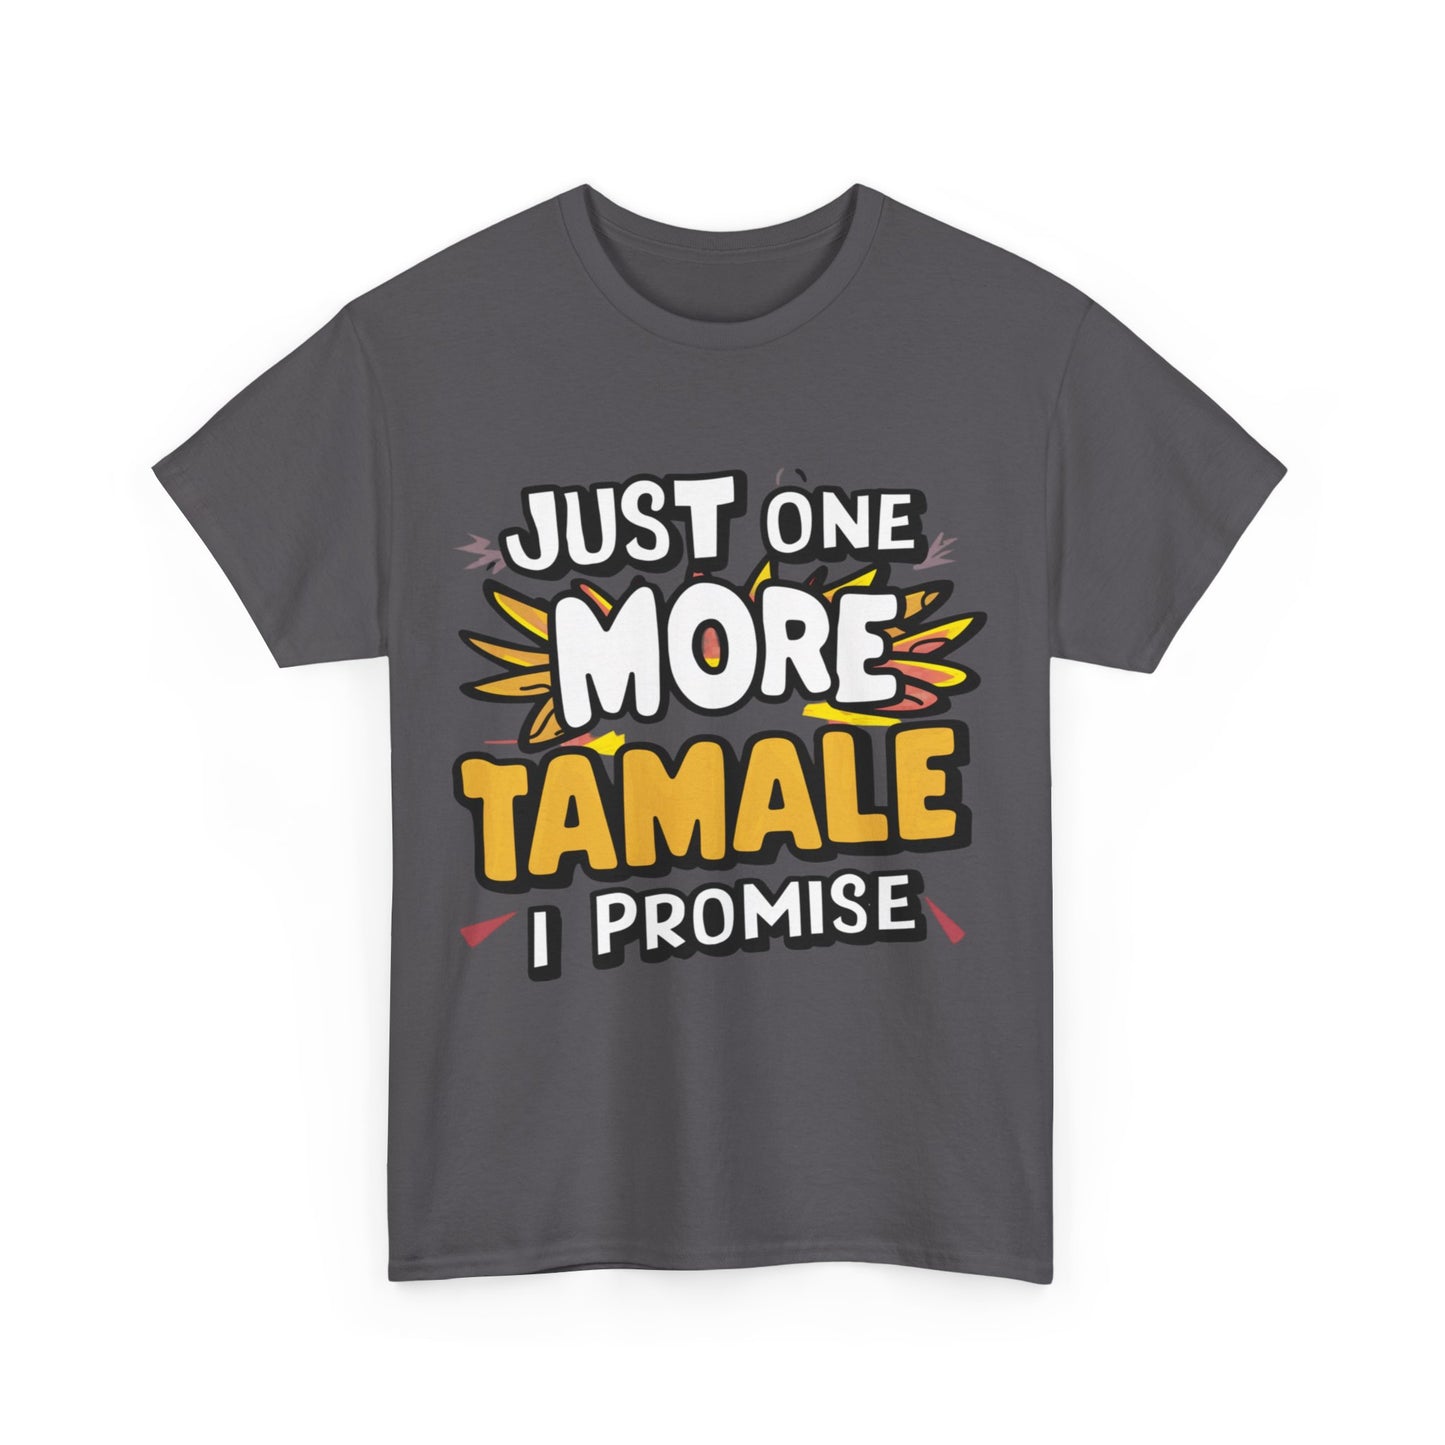 Just One More Tamale I Promise Mexican Food Graphic Unisex Heavy Cotton Tee Cotton Funny Humorous Graphic Soft Premium Unisex Men Women Charcoal T-shirt Birthday Gift-18